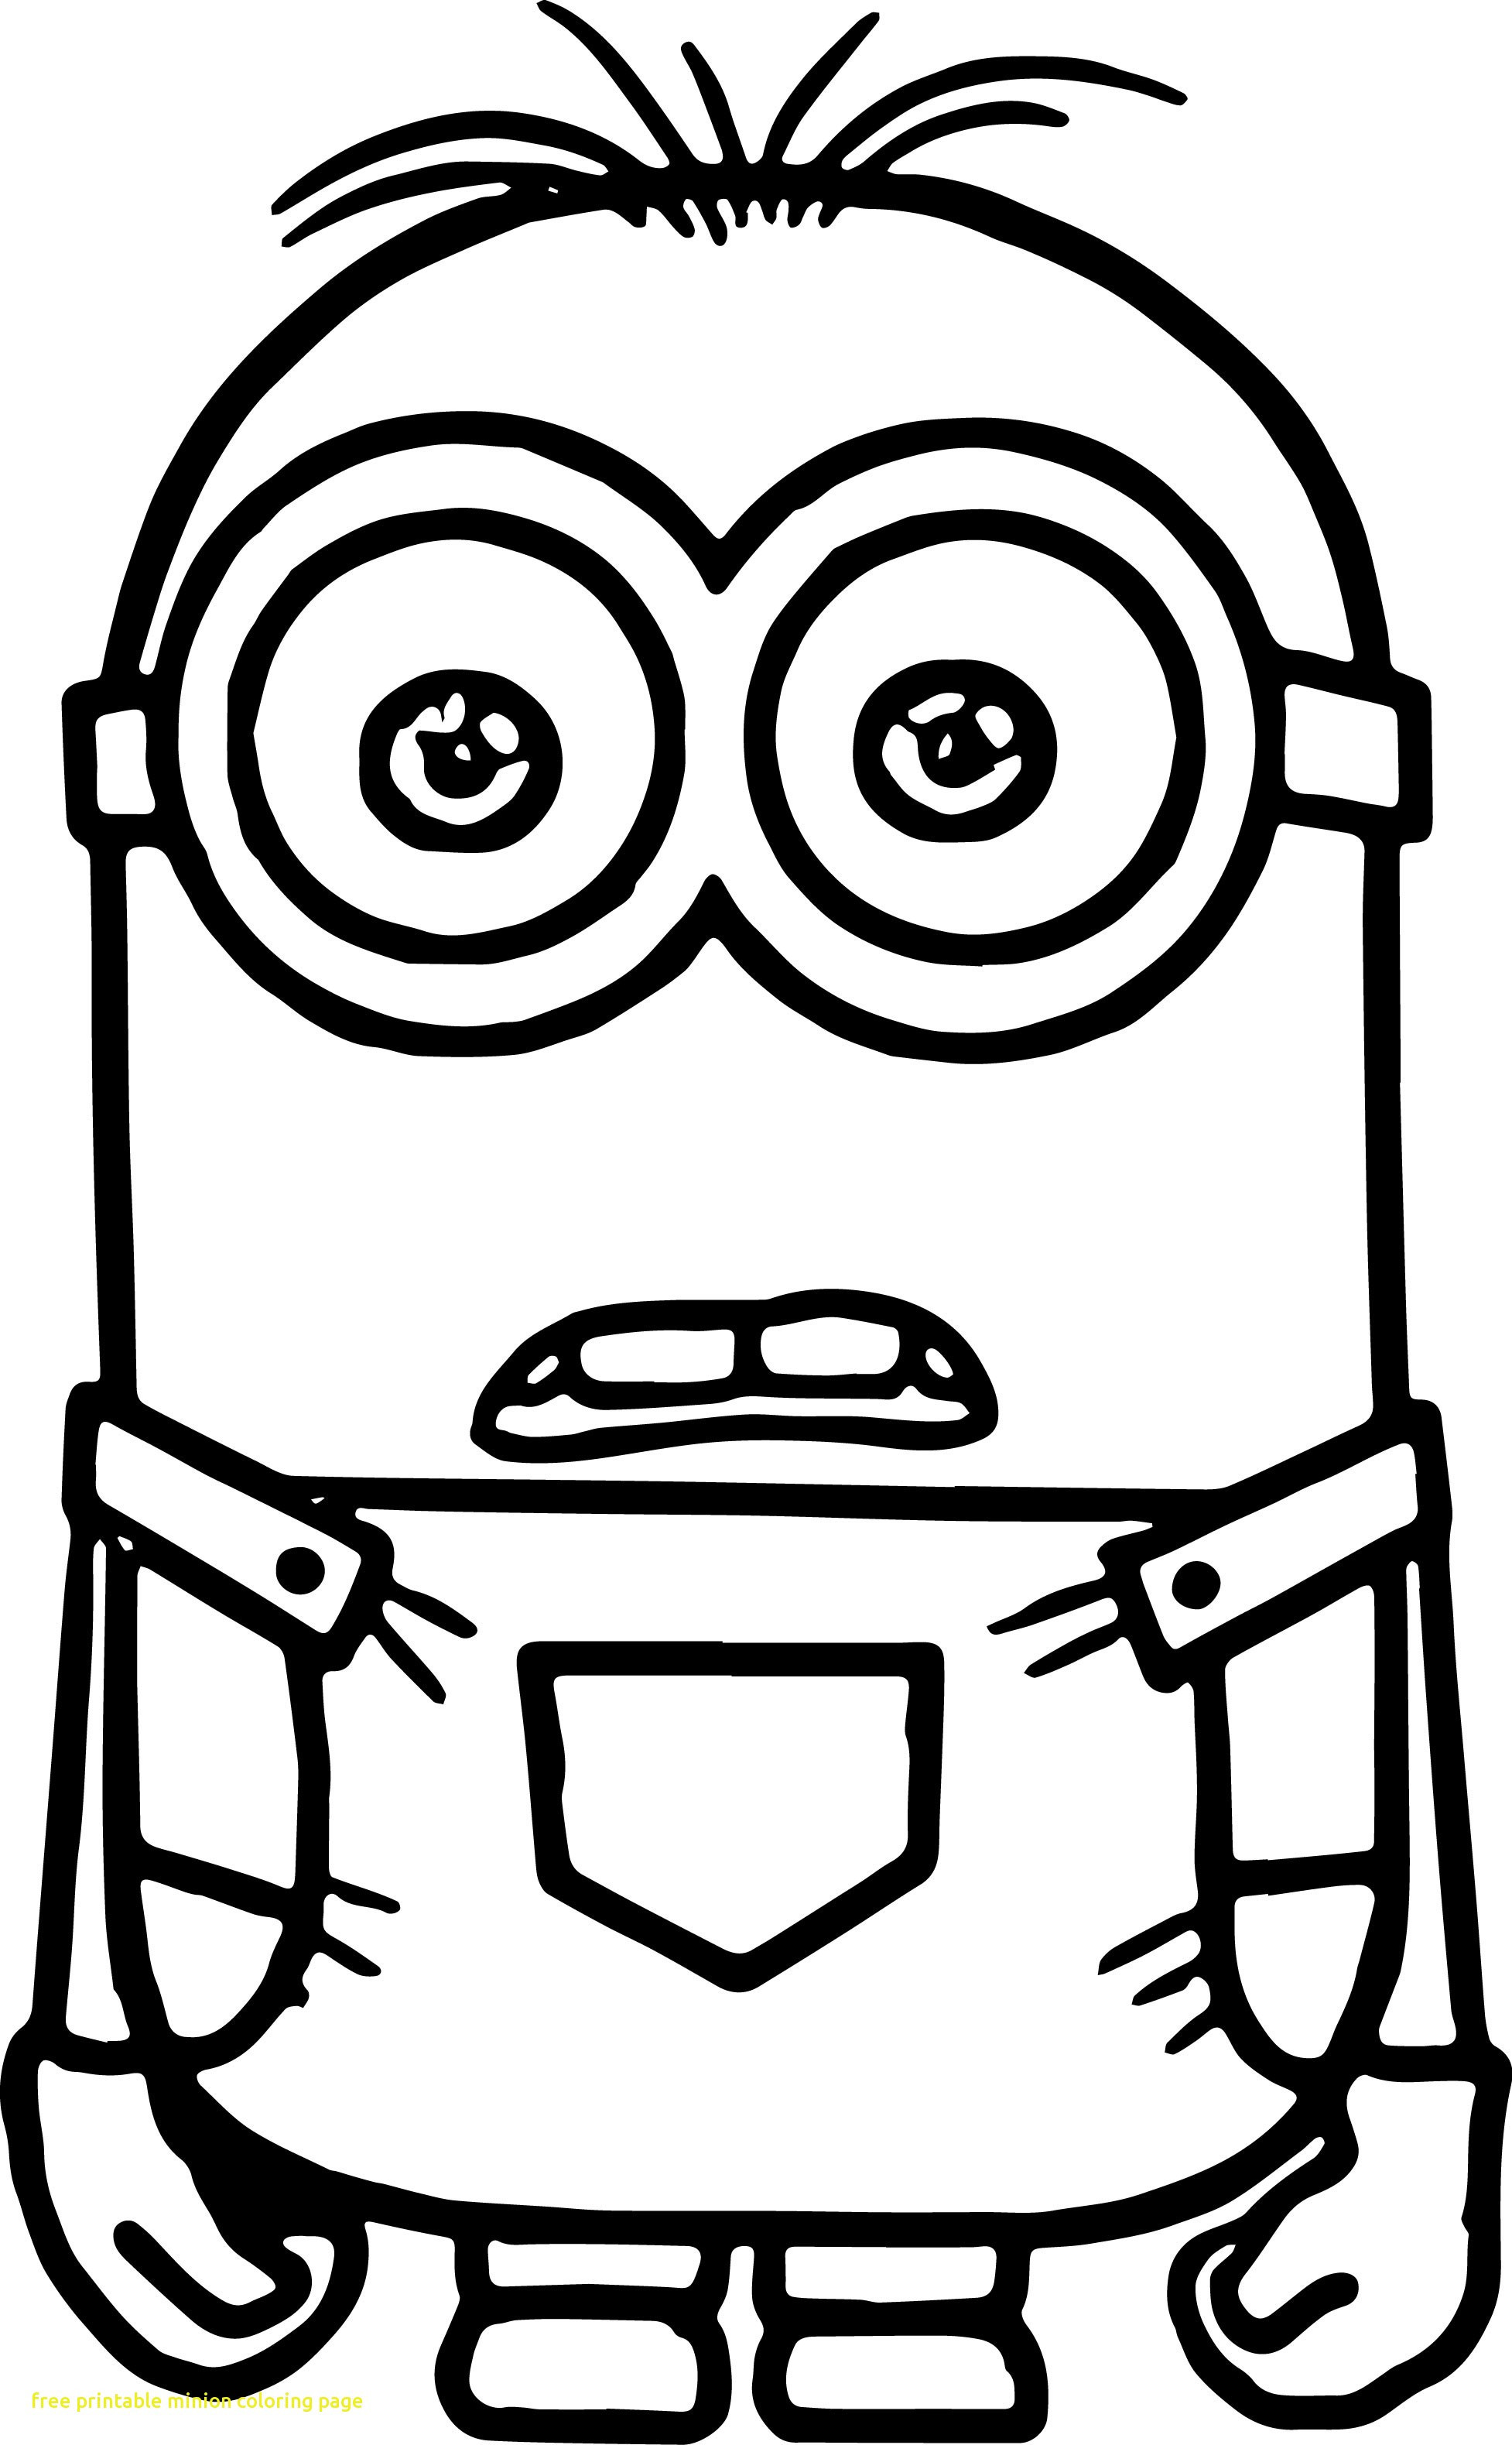 Minion Coloring Pages To Print Out at GetDrawings Free download